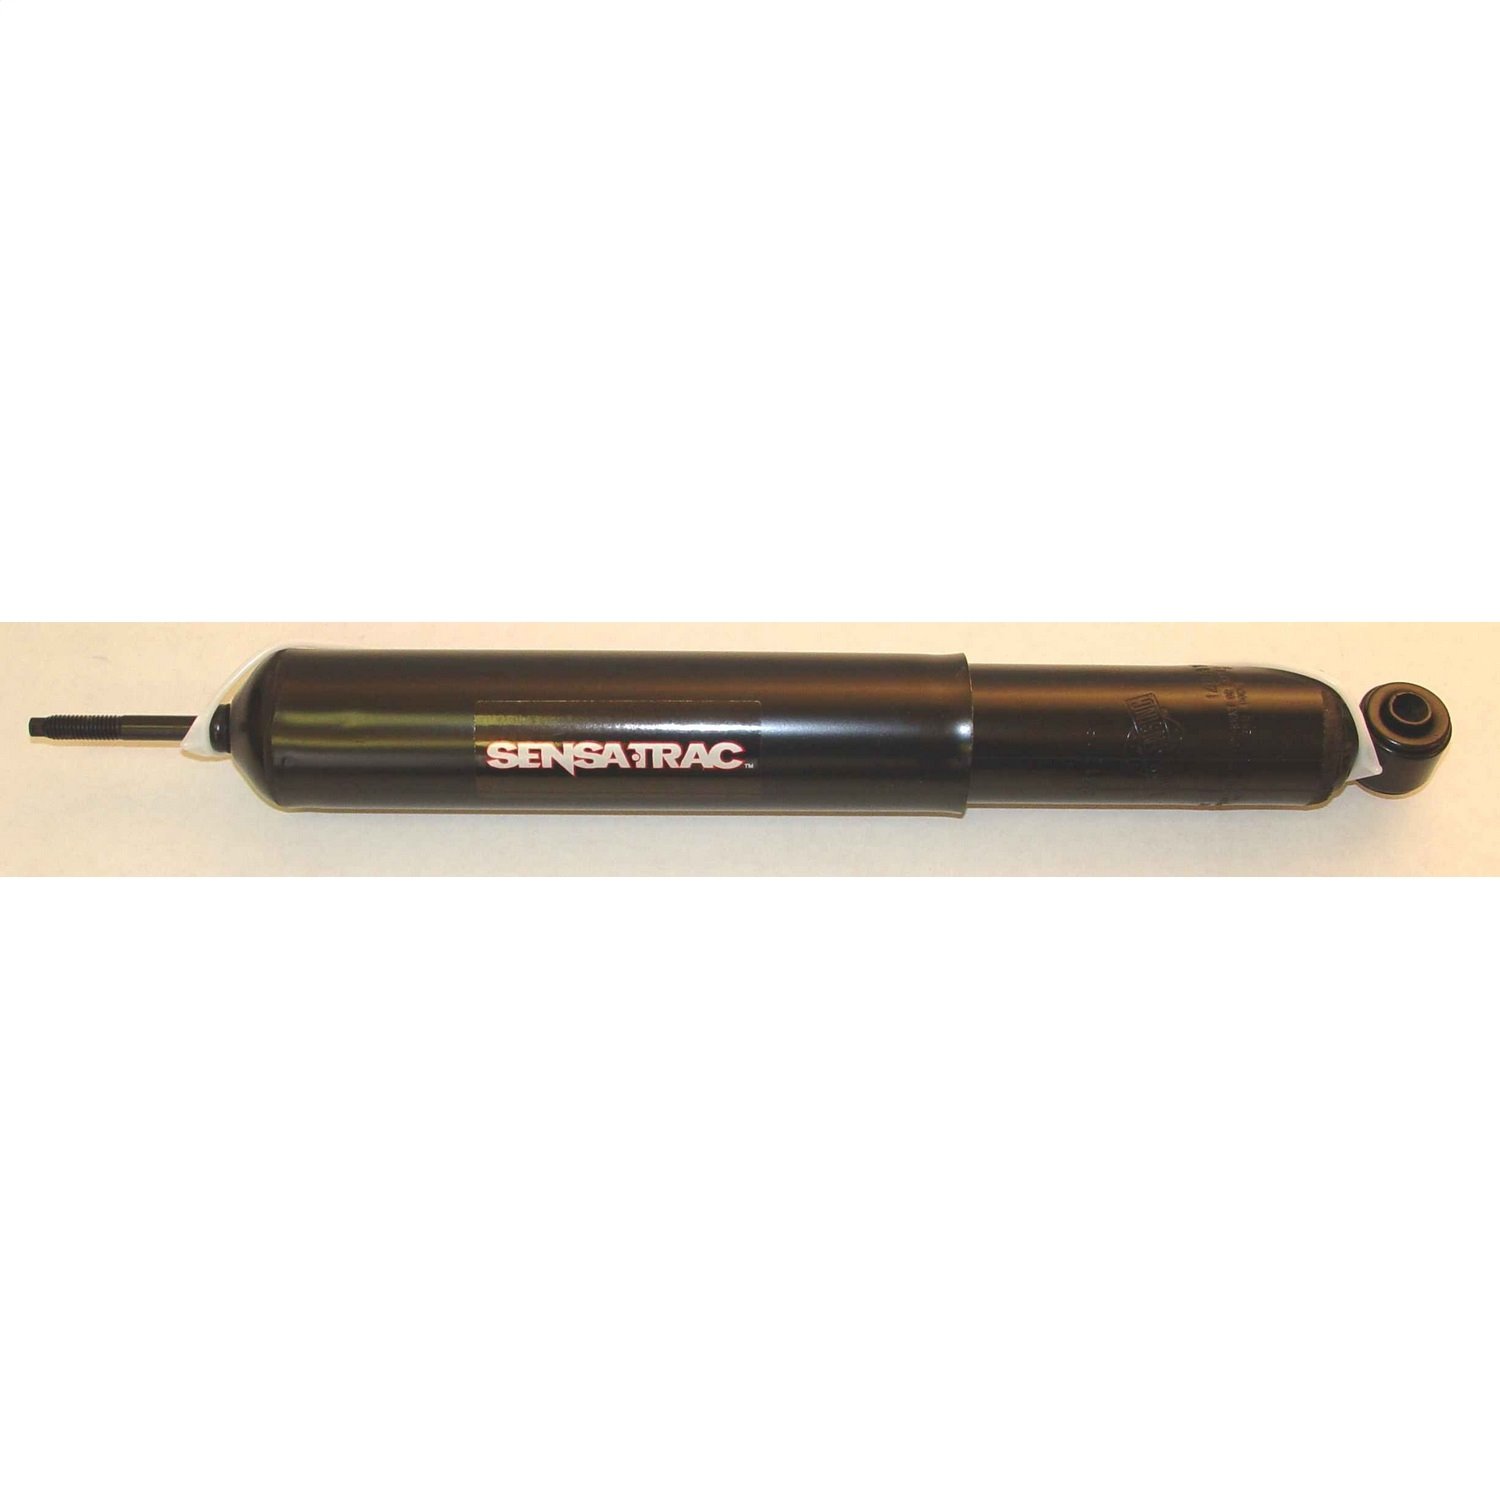 This heavy-duty front shock absorber from Rugged Ridge fits 87-95 Jeep Wranglers.